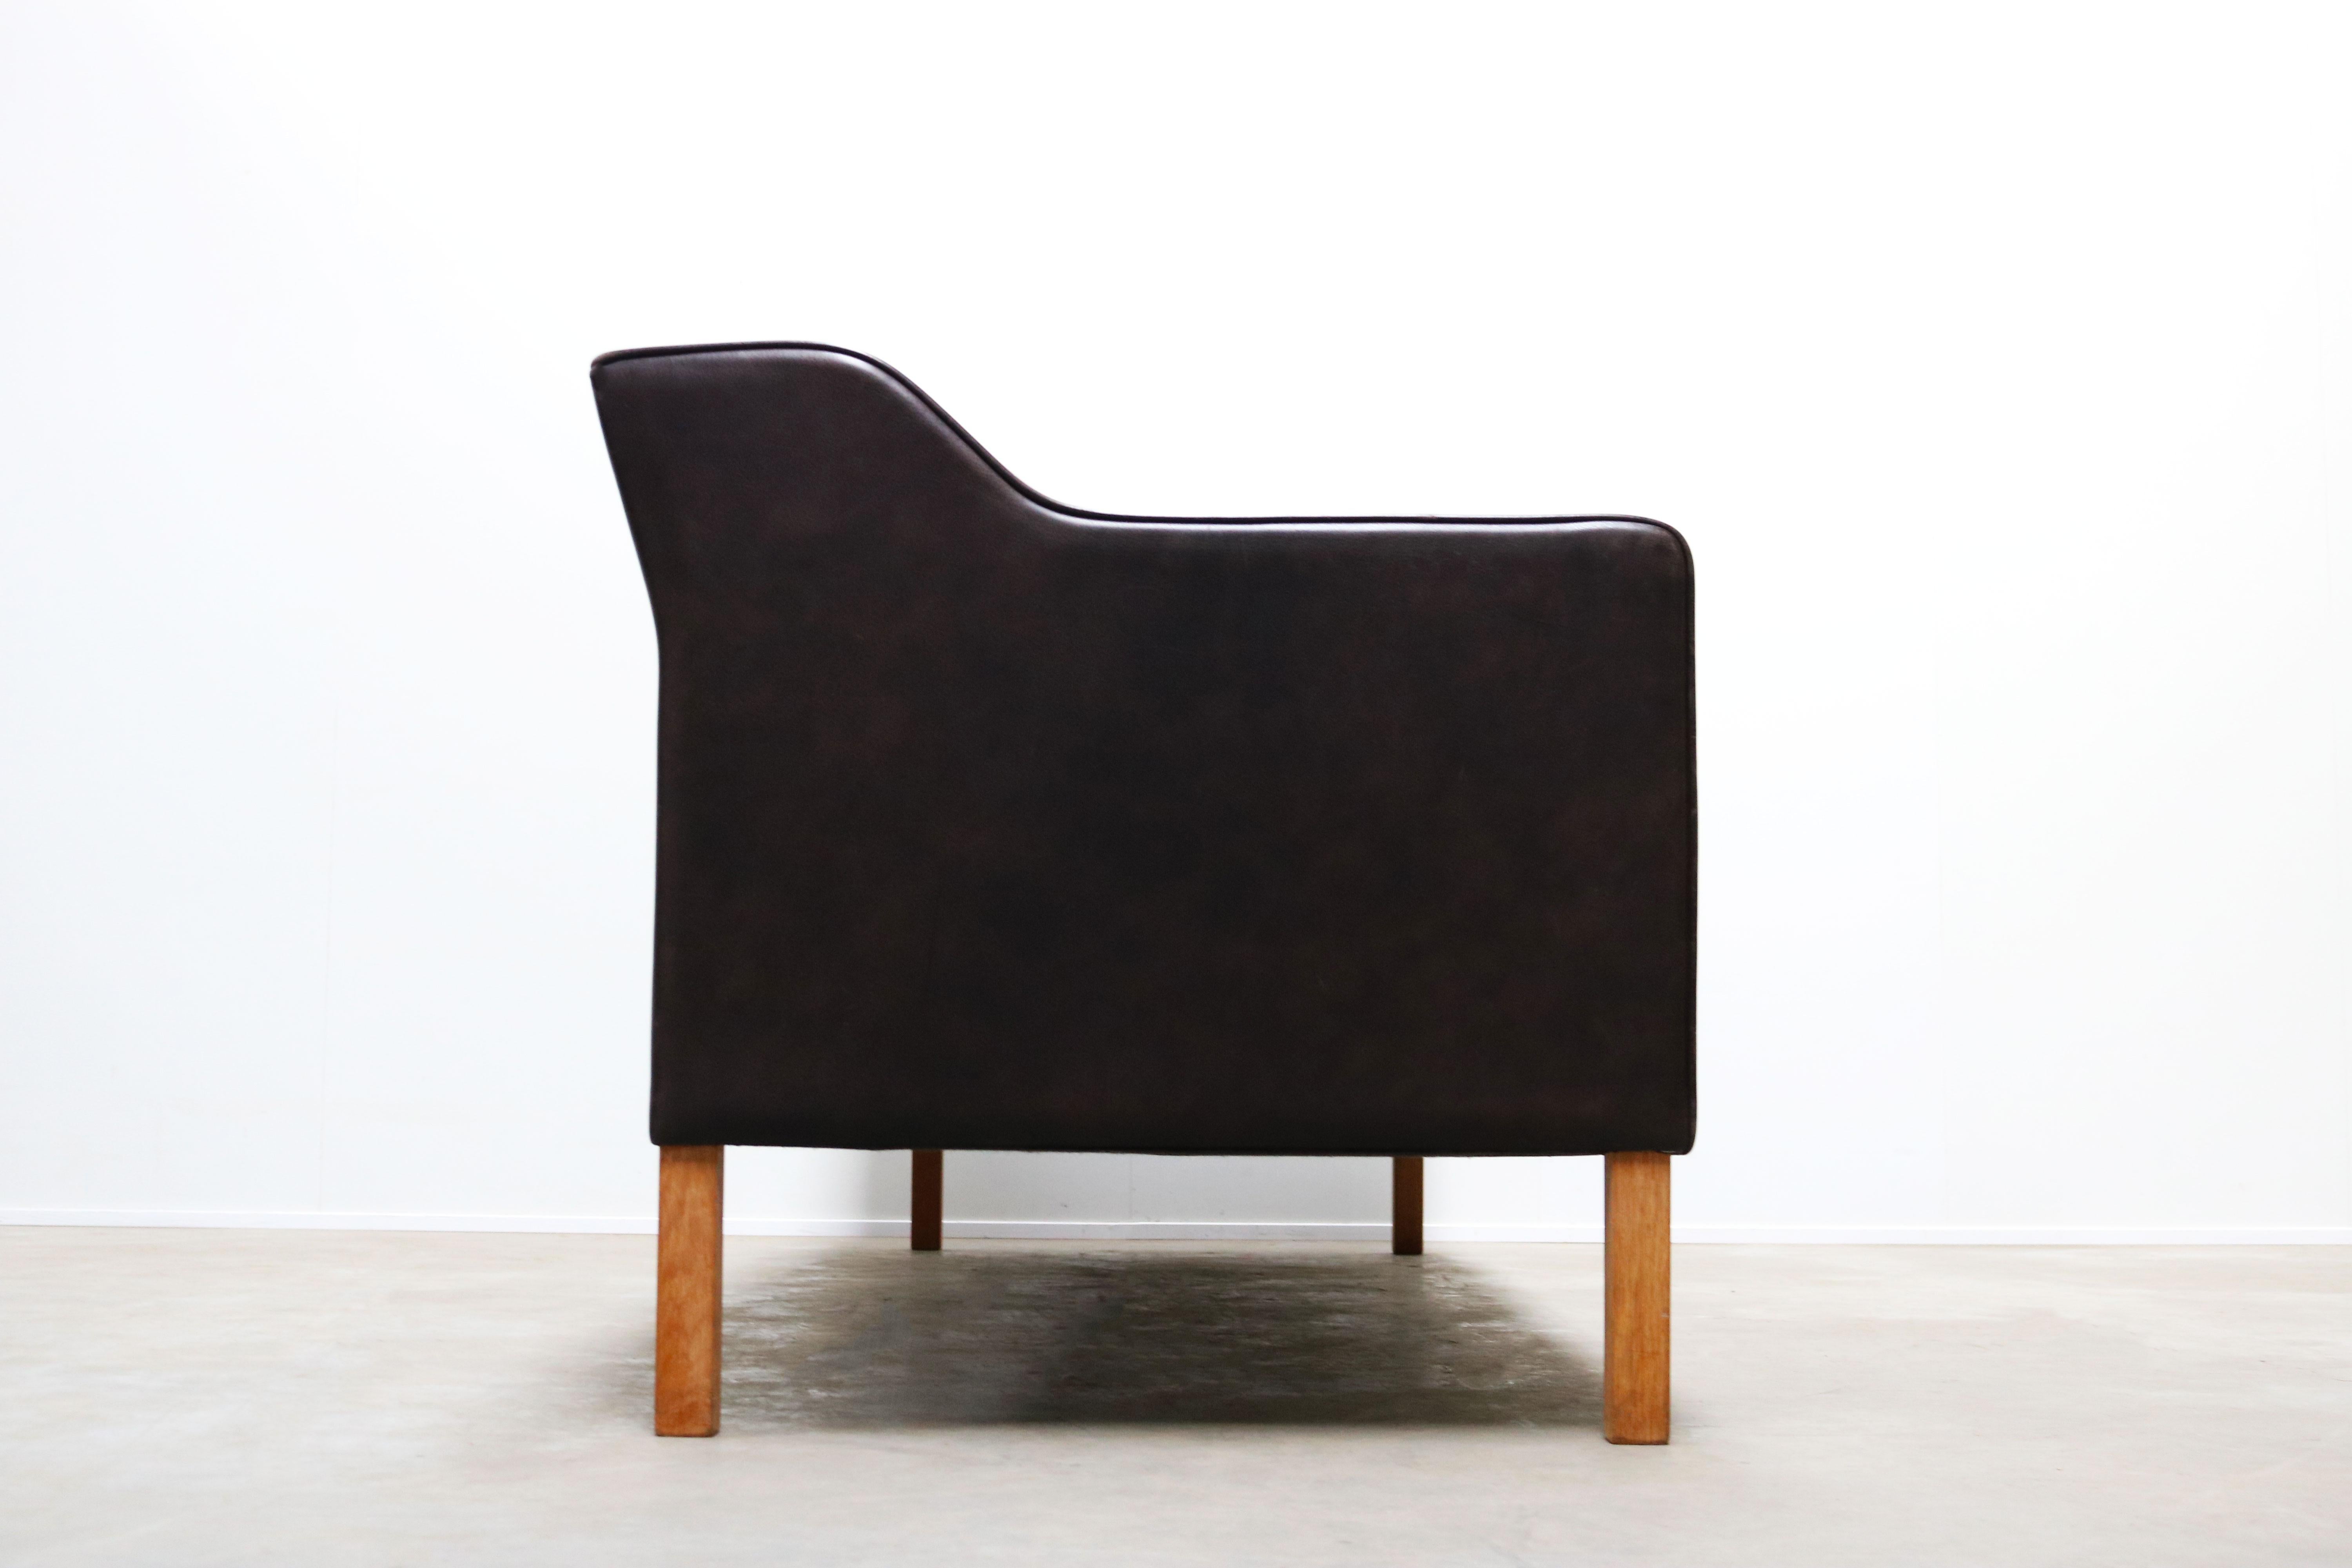 Vintage Black Leather Sofa 2213 by Børge Mogensen for Fredericia 1960 Three-Seat 2